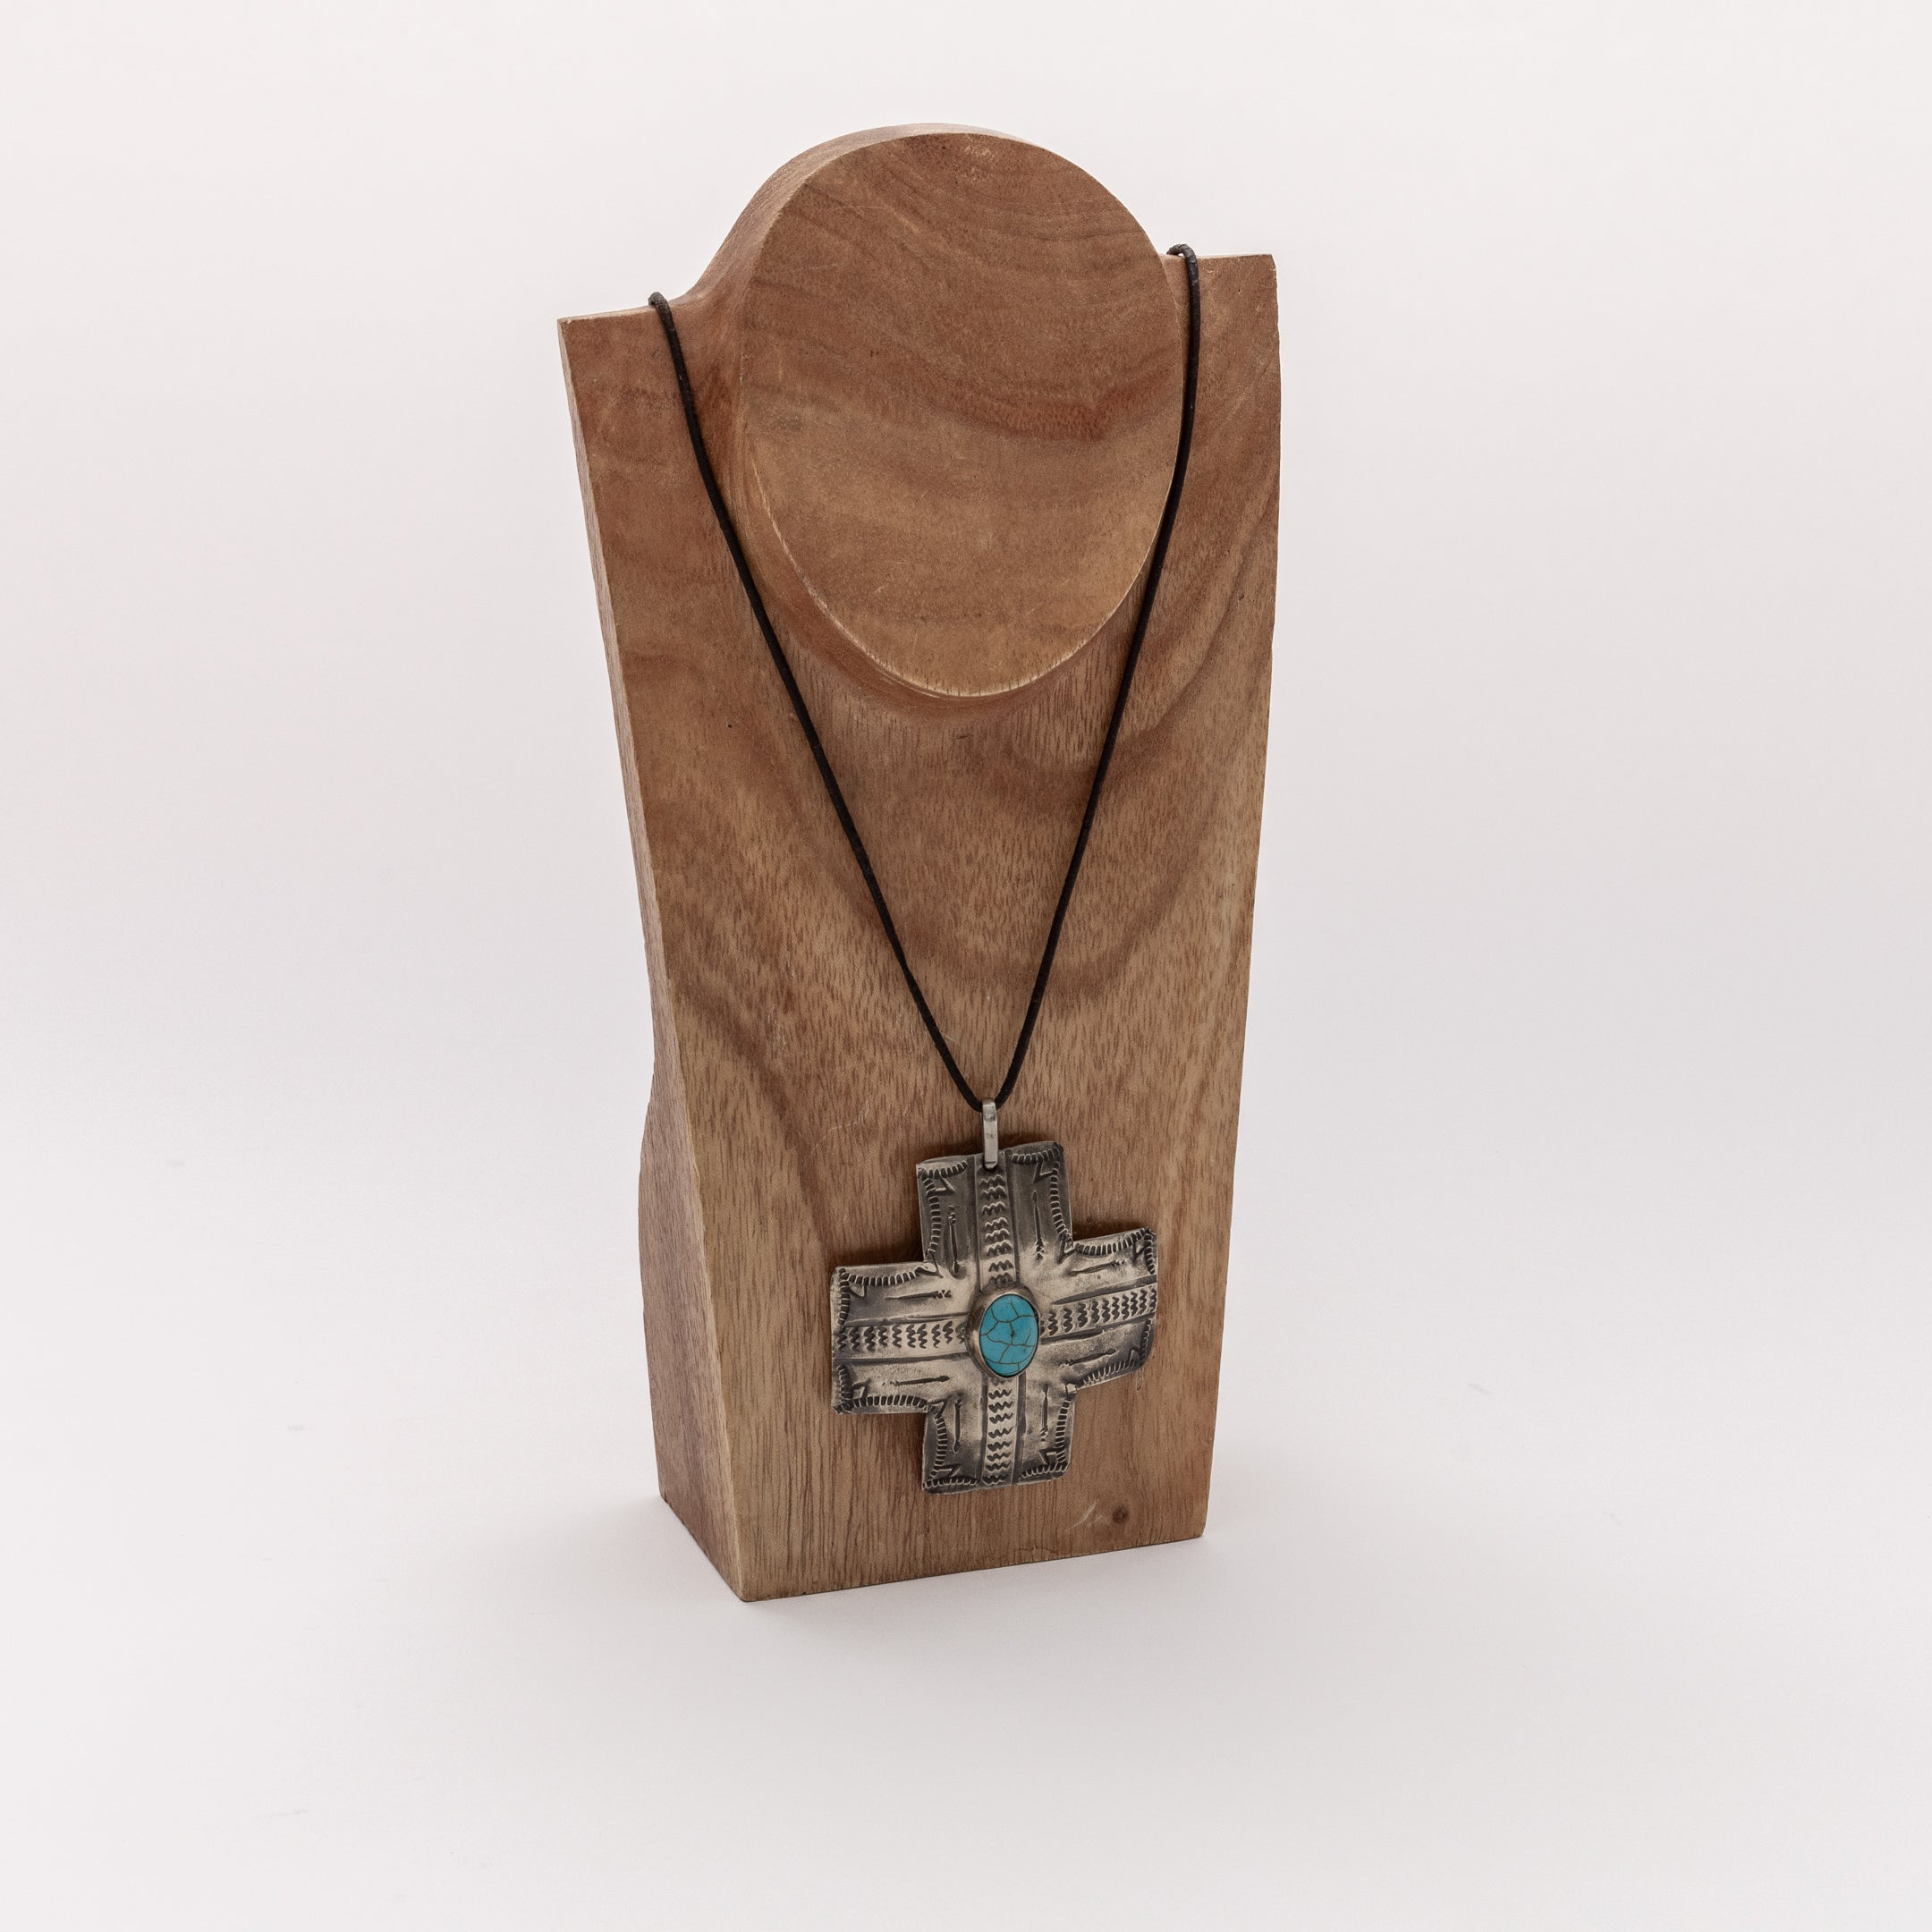 WJA-085-60-5-T NEW MEXICAN CROSS PENDANT-NECKLACE